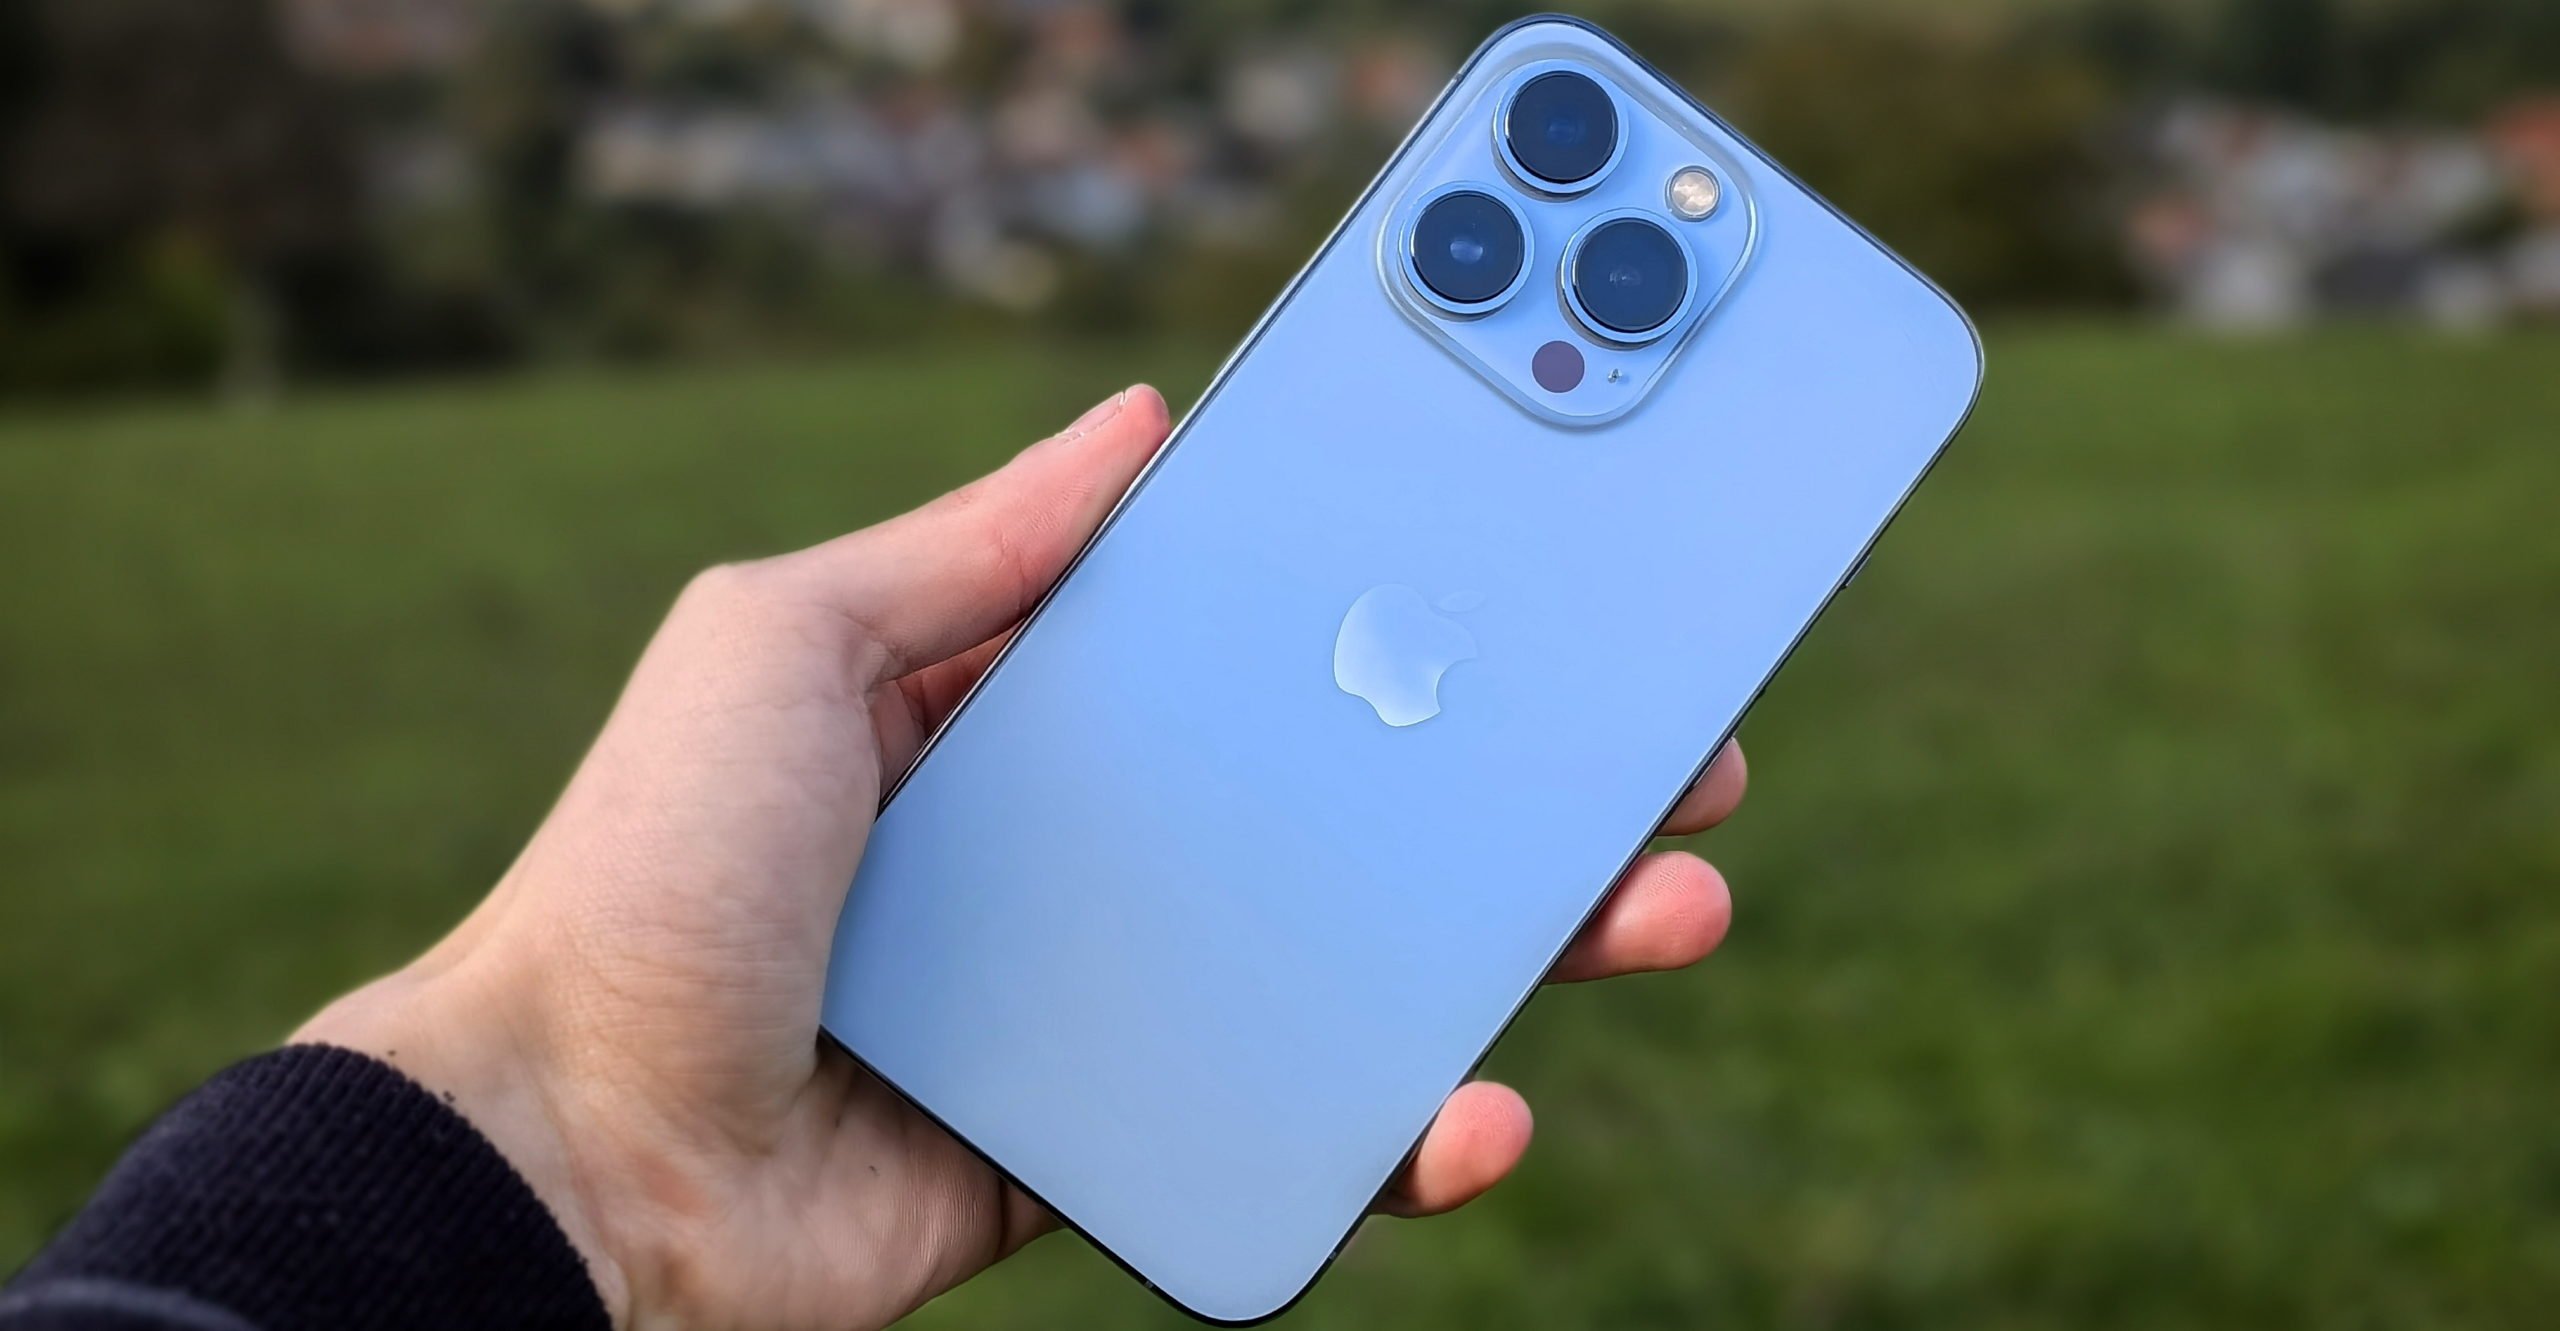 iPhone 11 Pro Max Review: Come for the Cameras, Stay for the